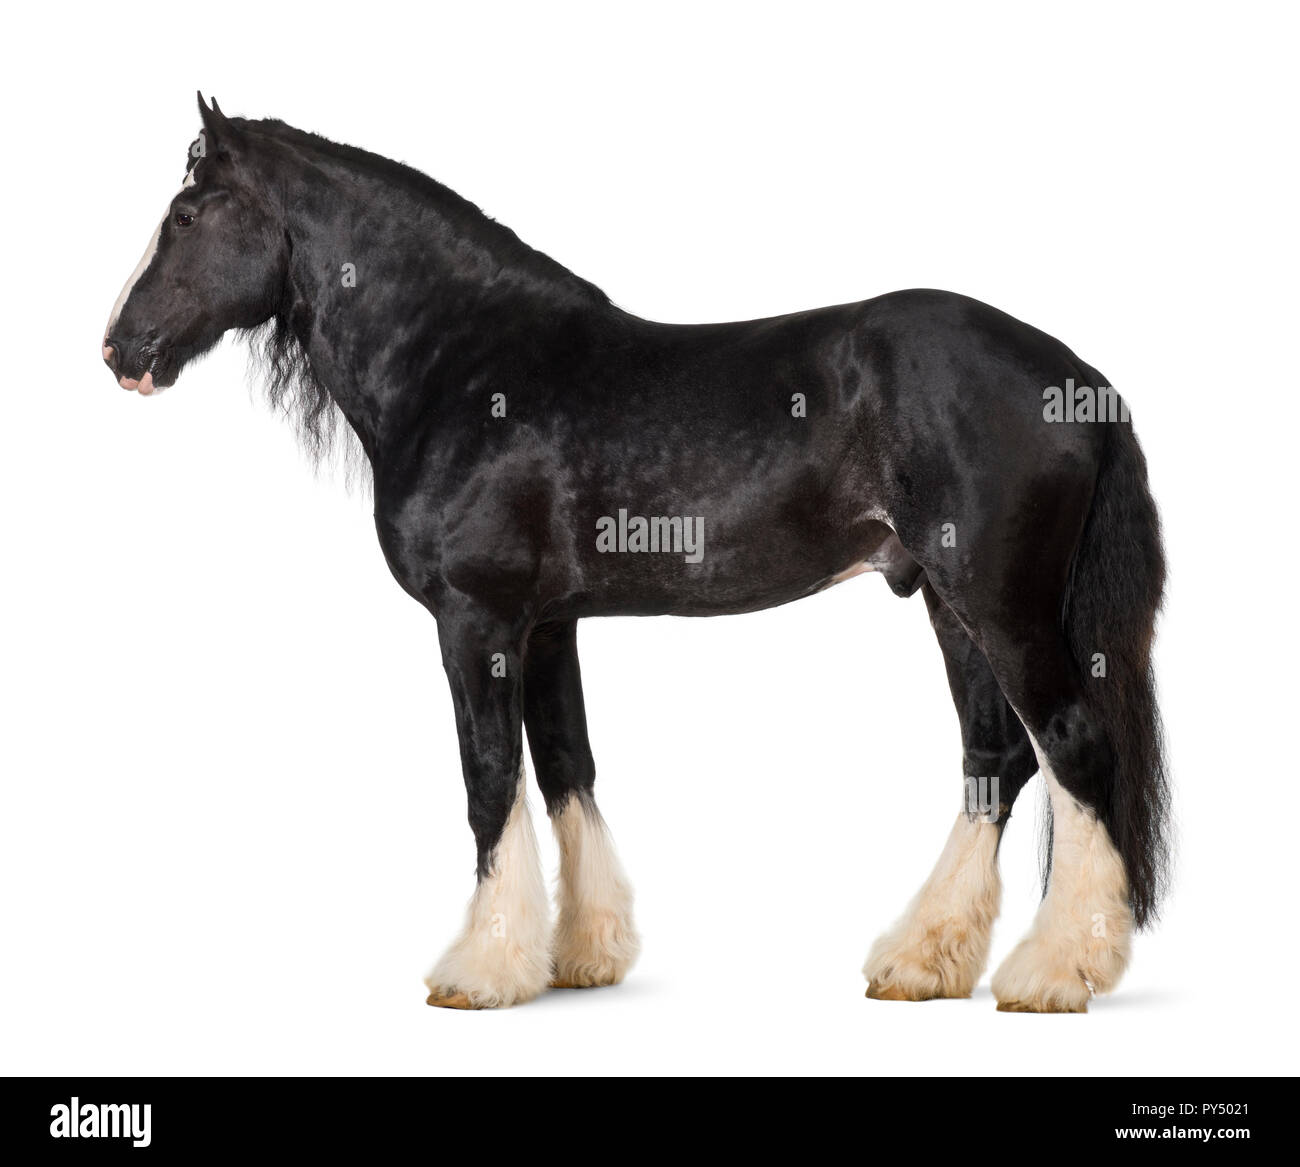 Shire Horse standing against white background Stock Photo